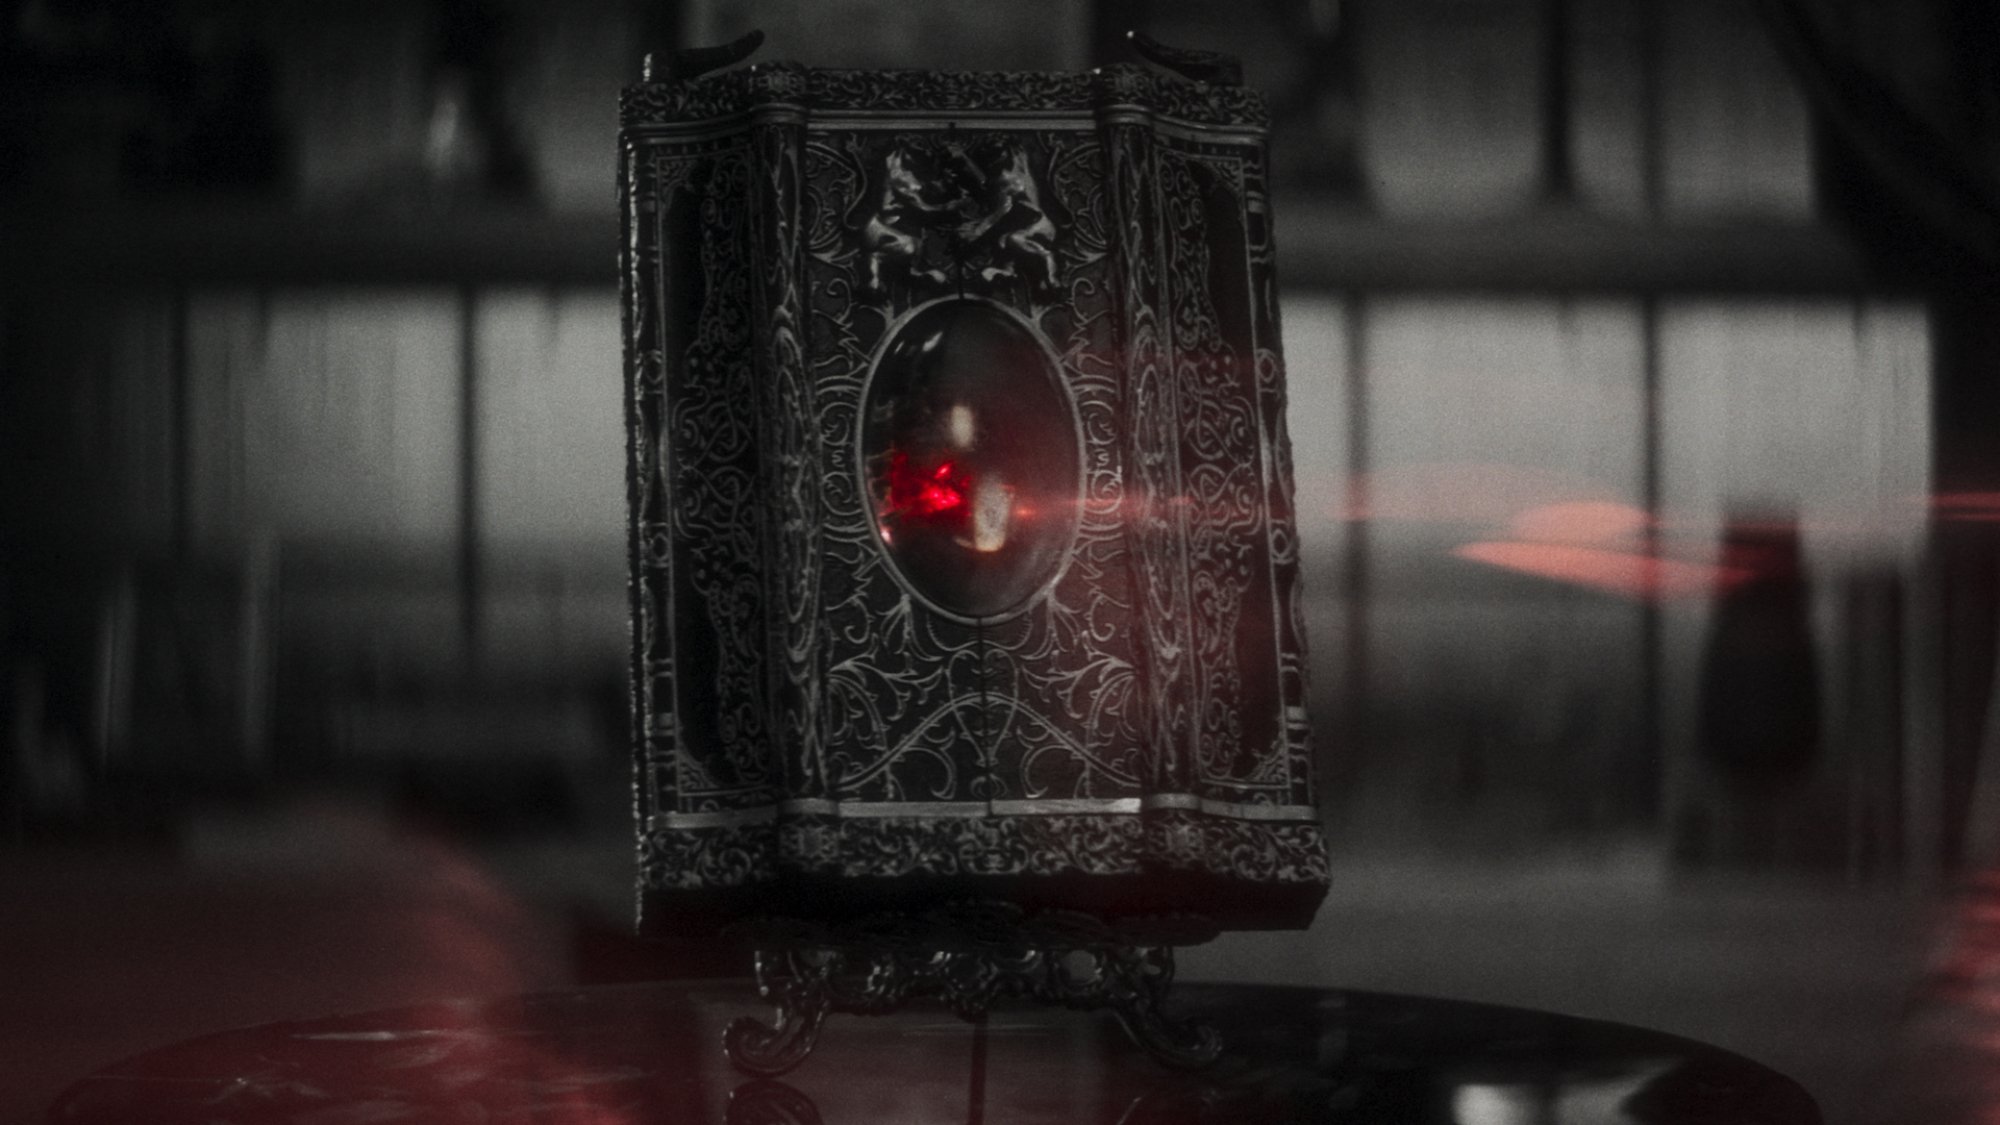 A black and white film still showing a red glowing stone in an elaborate case.